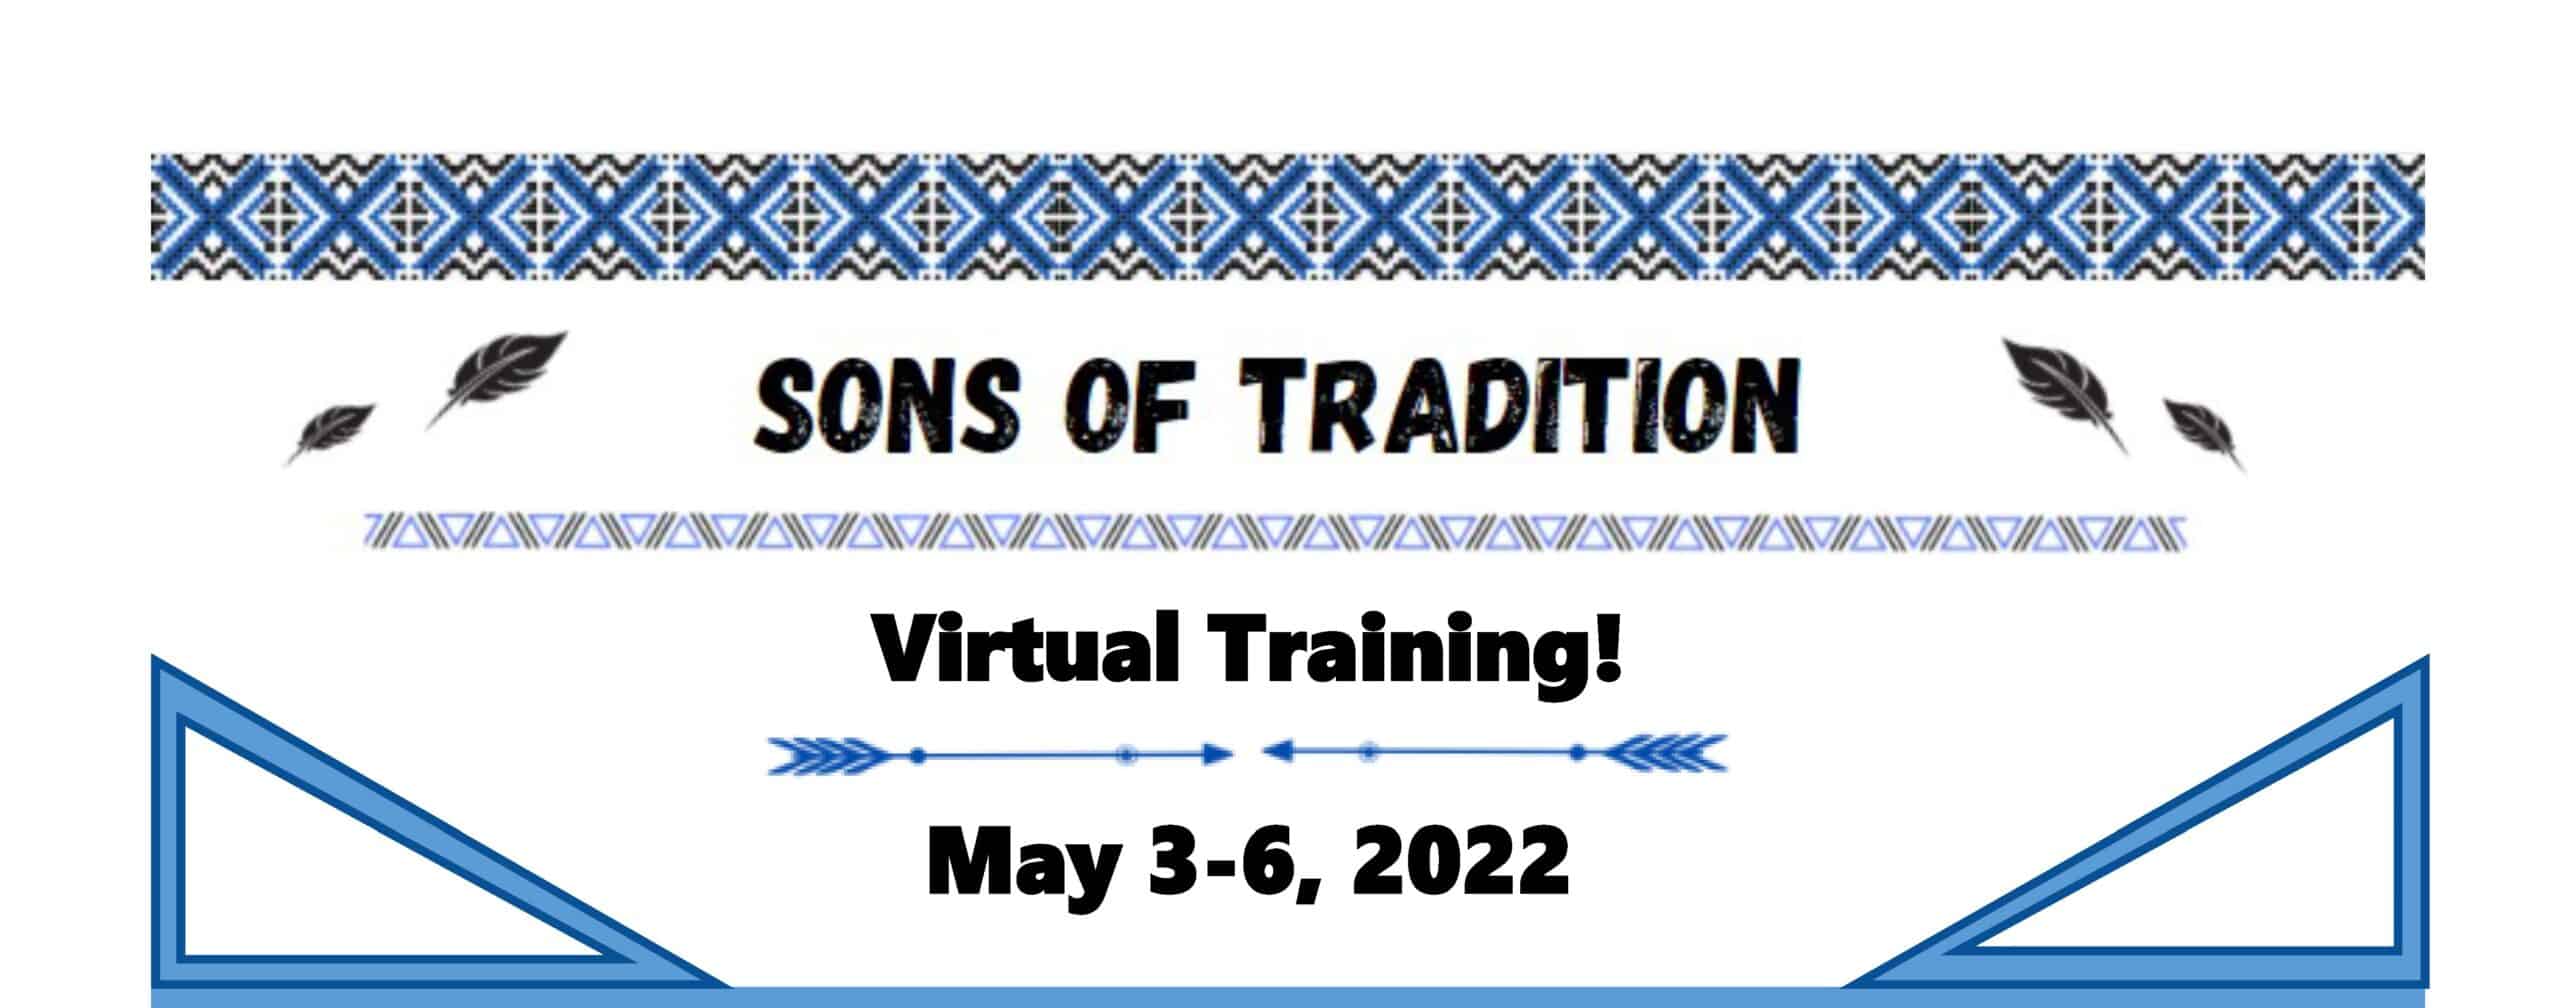 Sons of Tradition (May 3-6, 2022) – 4 Day Virtual Zoom Training